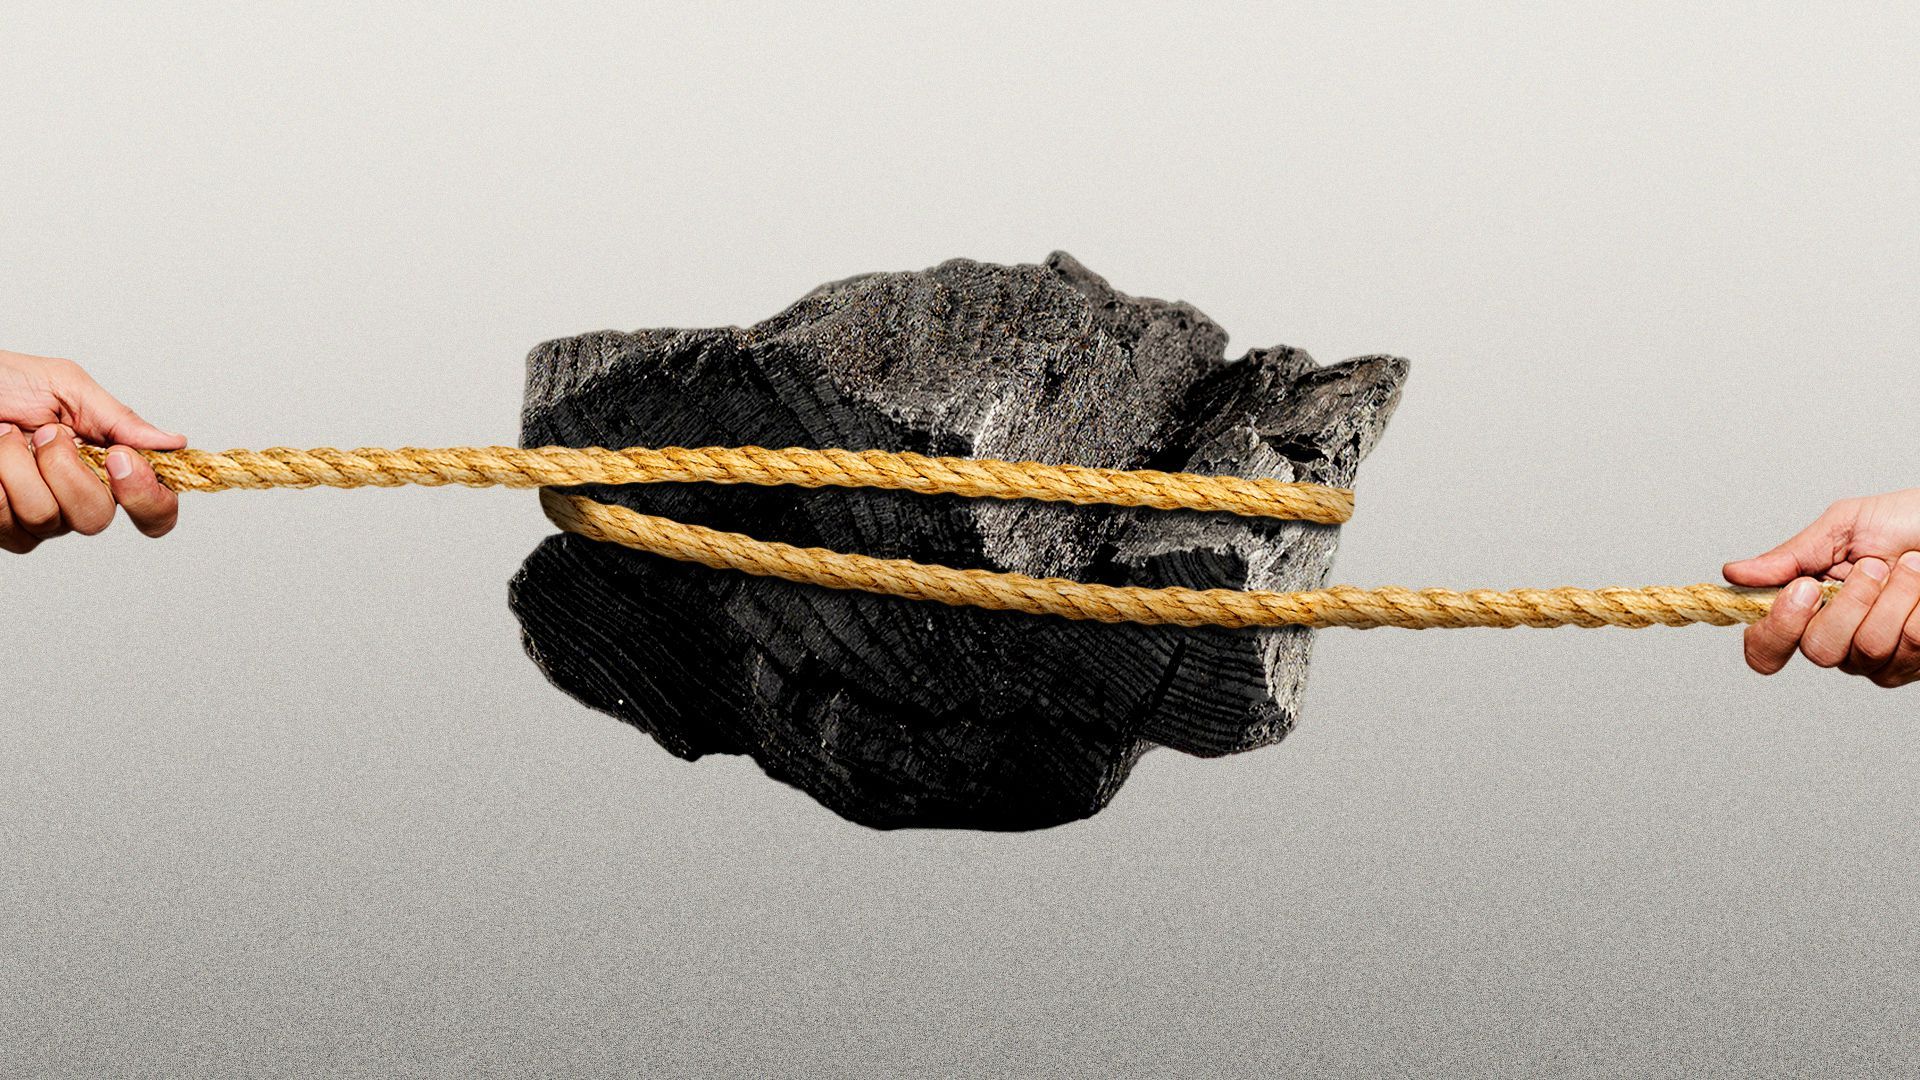 Illustration of a tug of war rope looped around a piece of coal with hands pulling on either end.